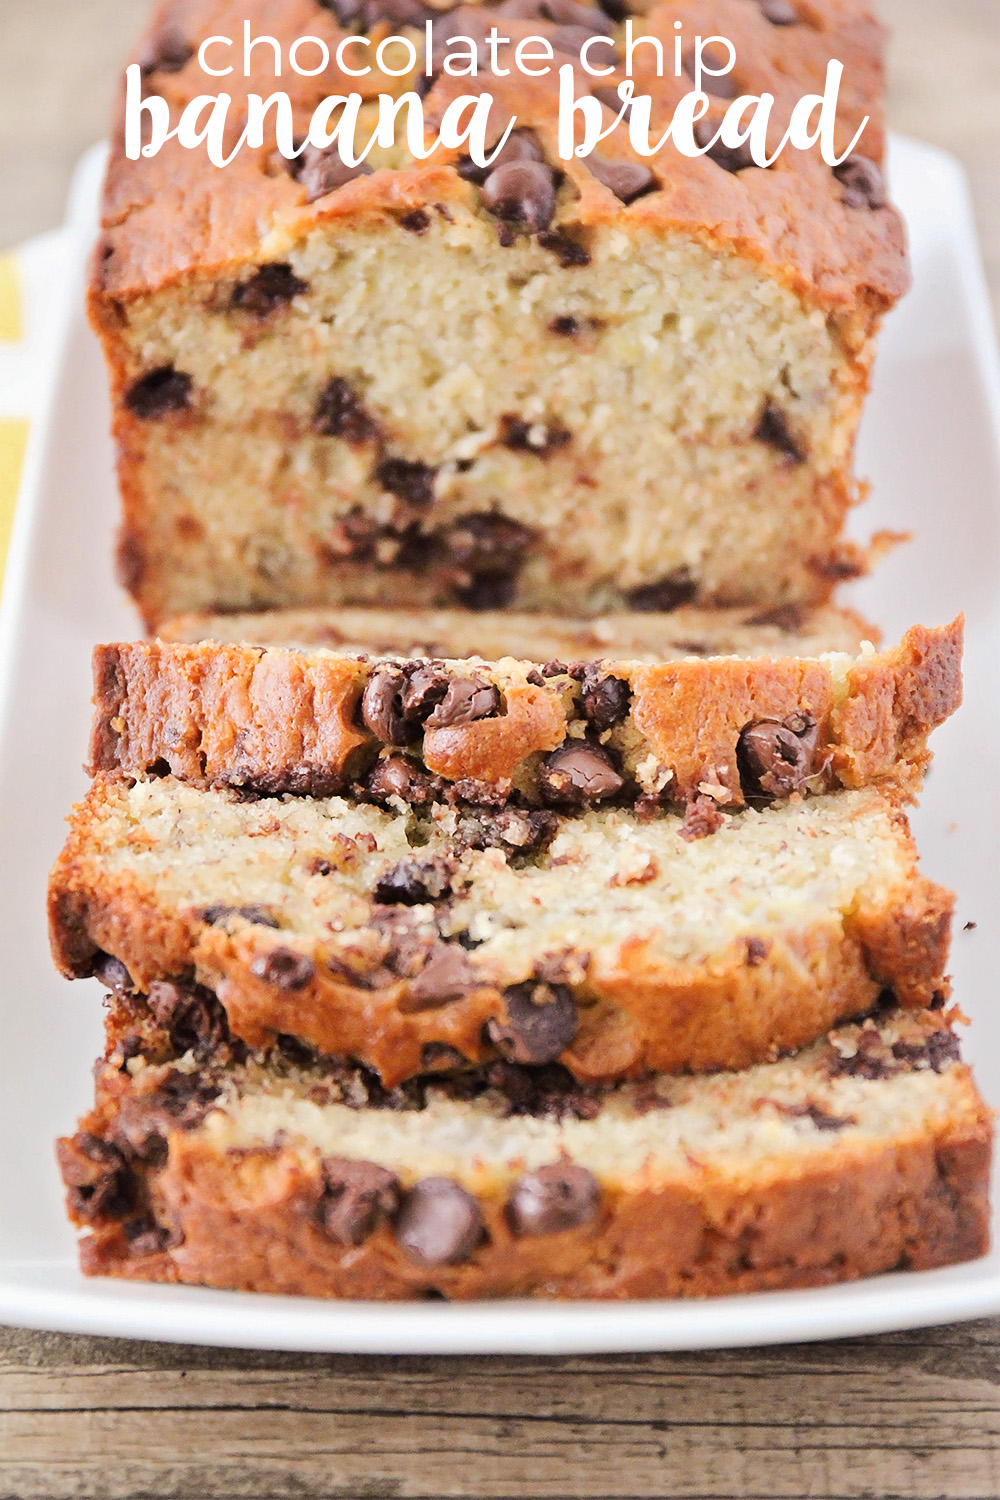 This sweet and delicious chocolate chip banana bread is loaded with chocolate flavor, and super easy to make!